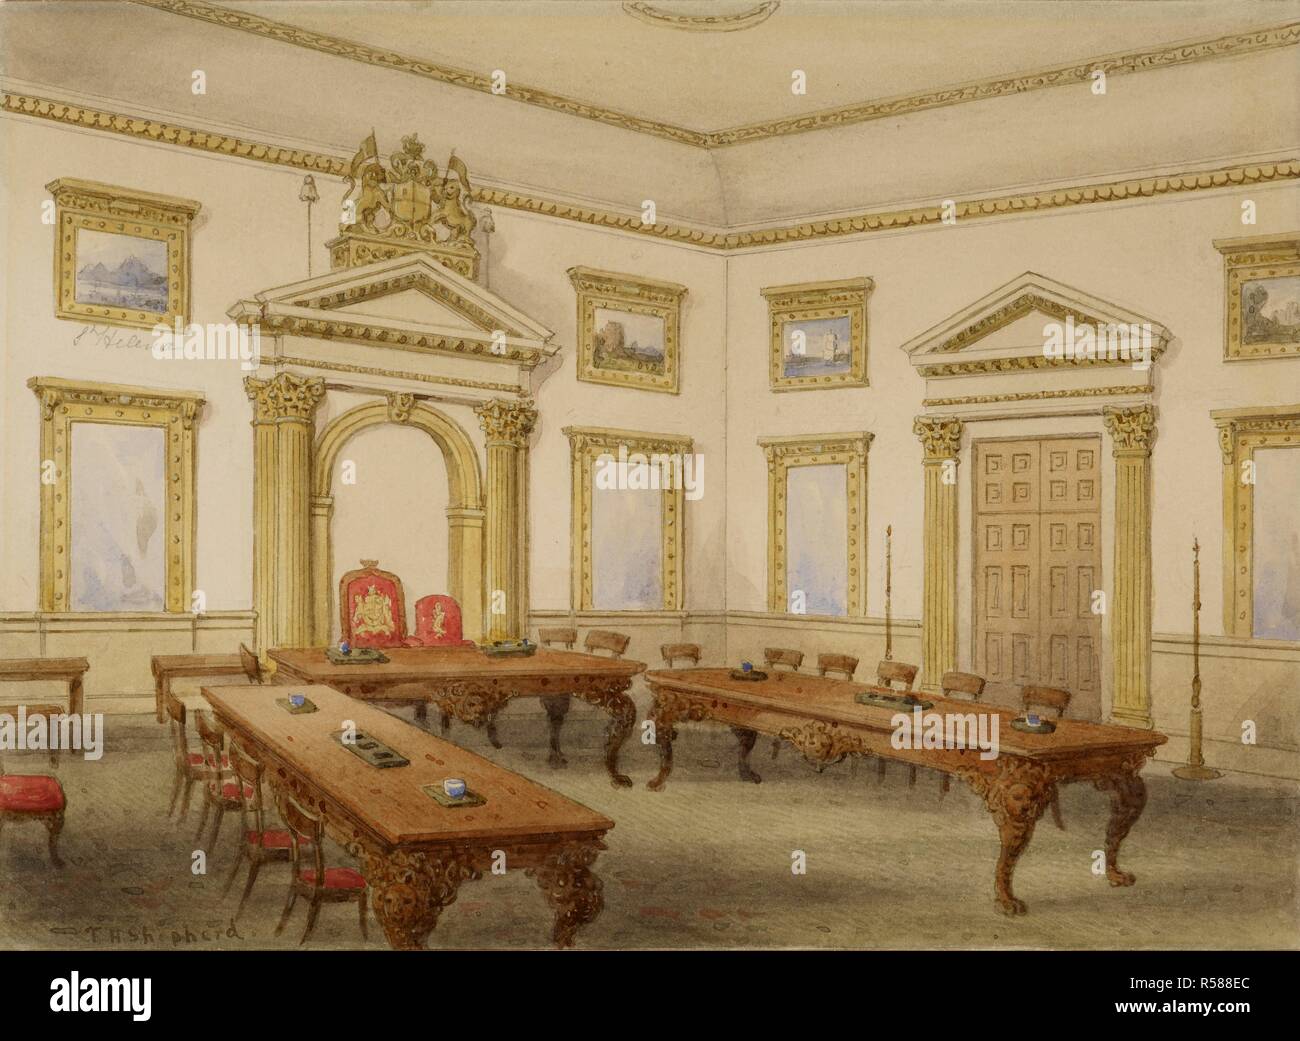 Director's room. c.1820. The Director's Court Room, East India House, Leadenhall Street, London. Watercolour.  Originally published/produced in c.1820. . Source: WD 2465,. Author: SHEPHERD, THOMAS HOSMER. Stock Photo